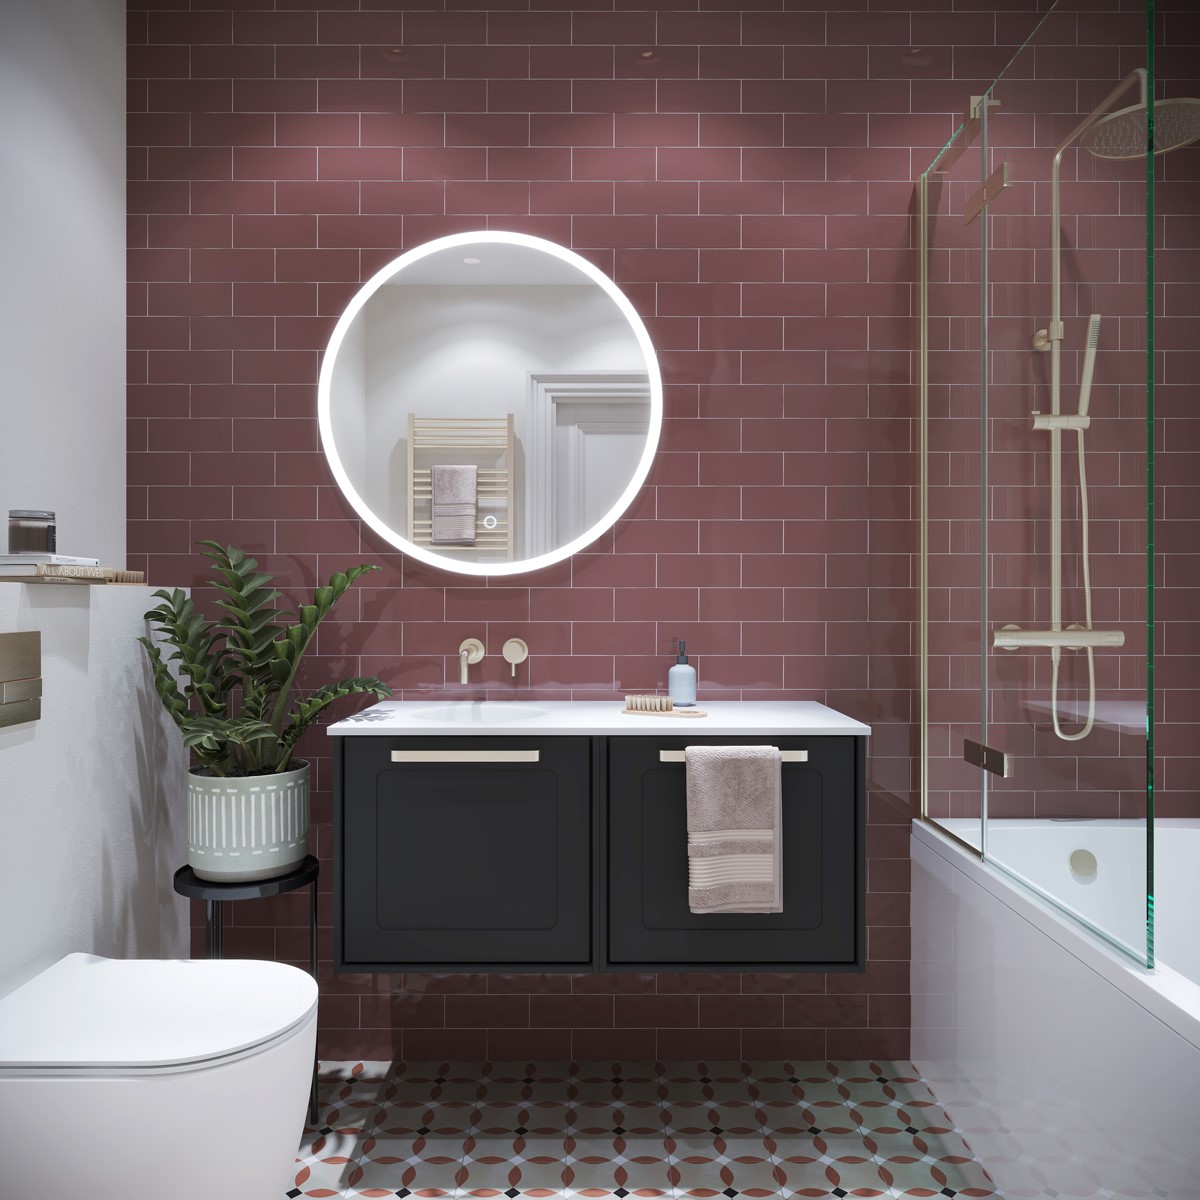 Small bathroom design | Create a stylish bathroom design that impresses through the years with classic and contemporary elements